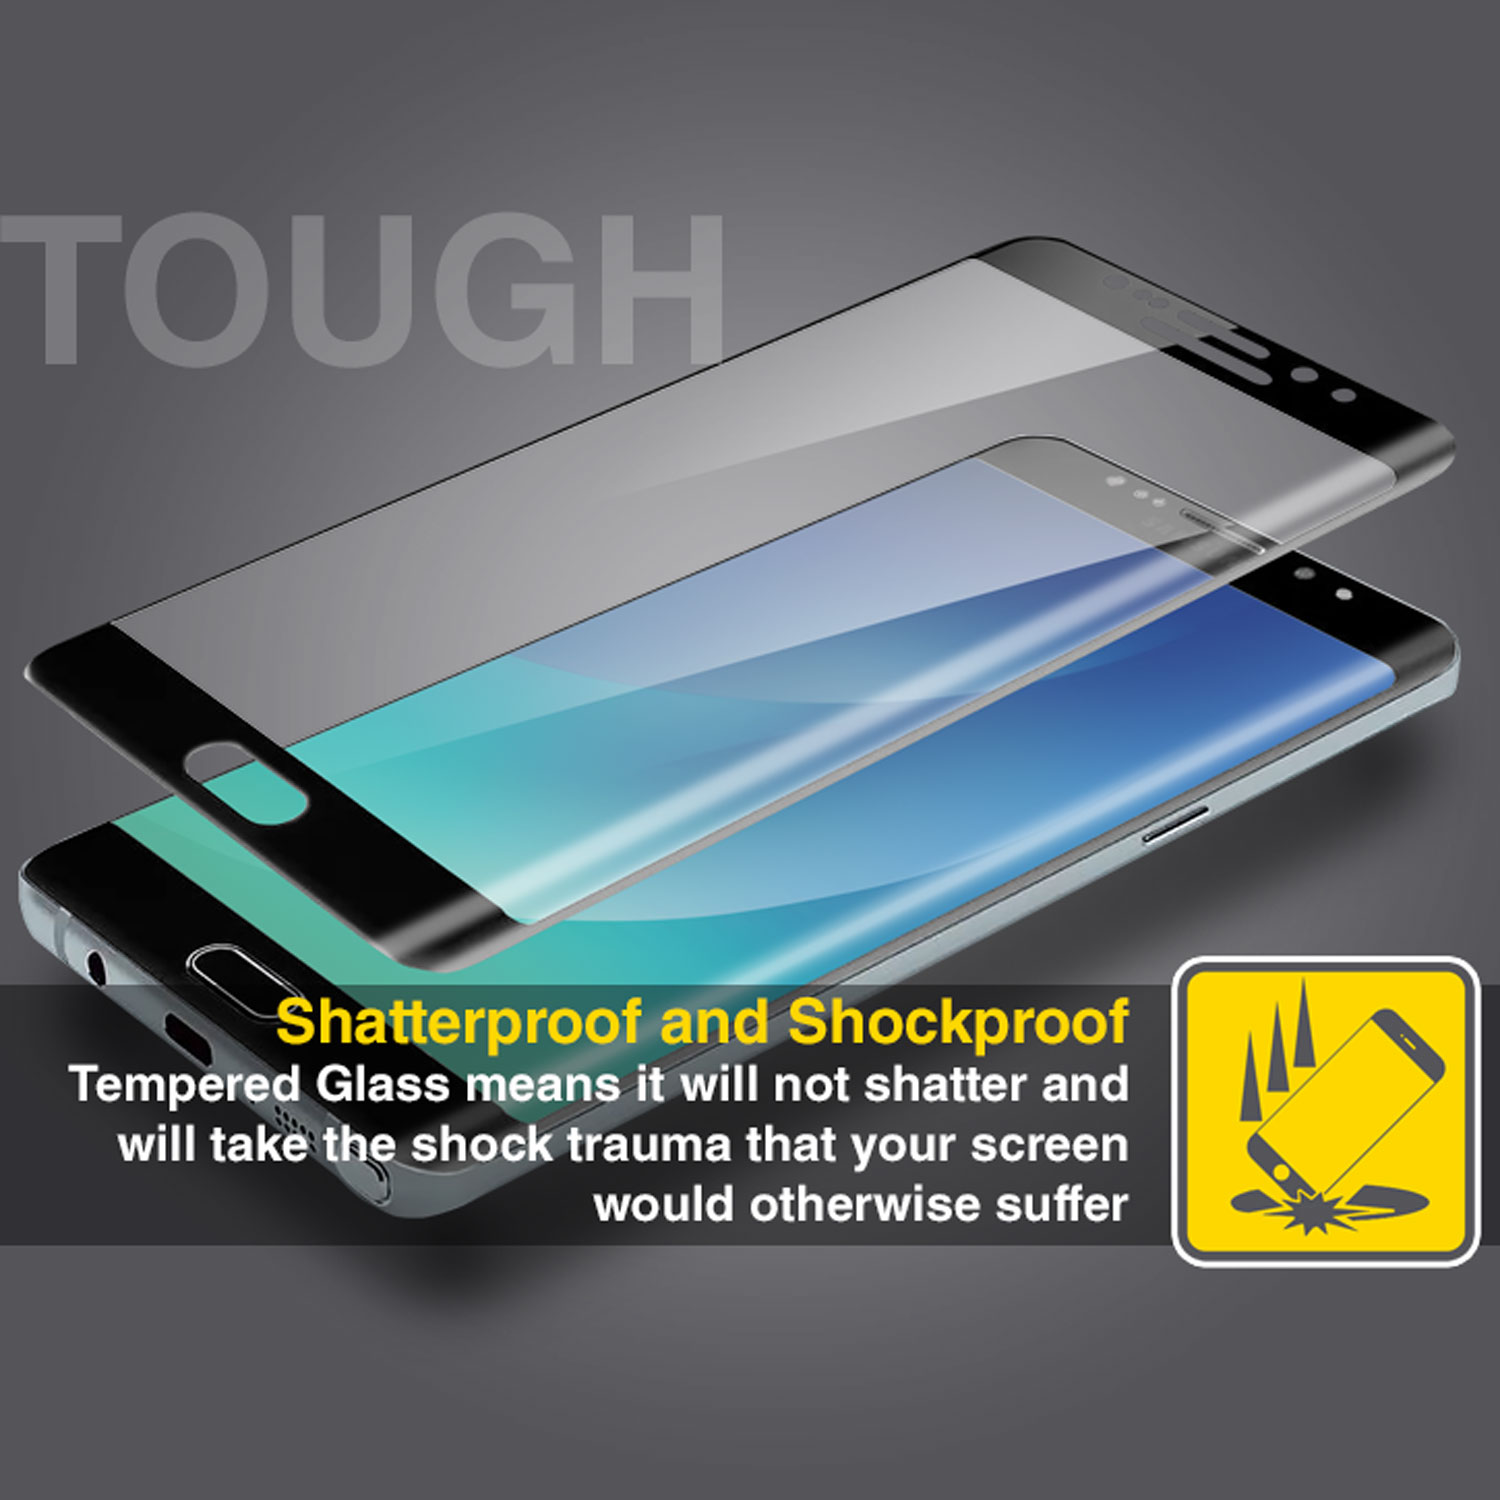 Samsung-Galaxy-Note-7-Black-Tempered-Shatterproof-Screen-Protector_nowat